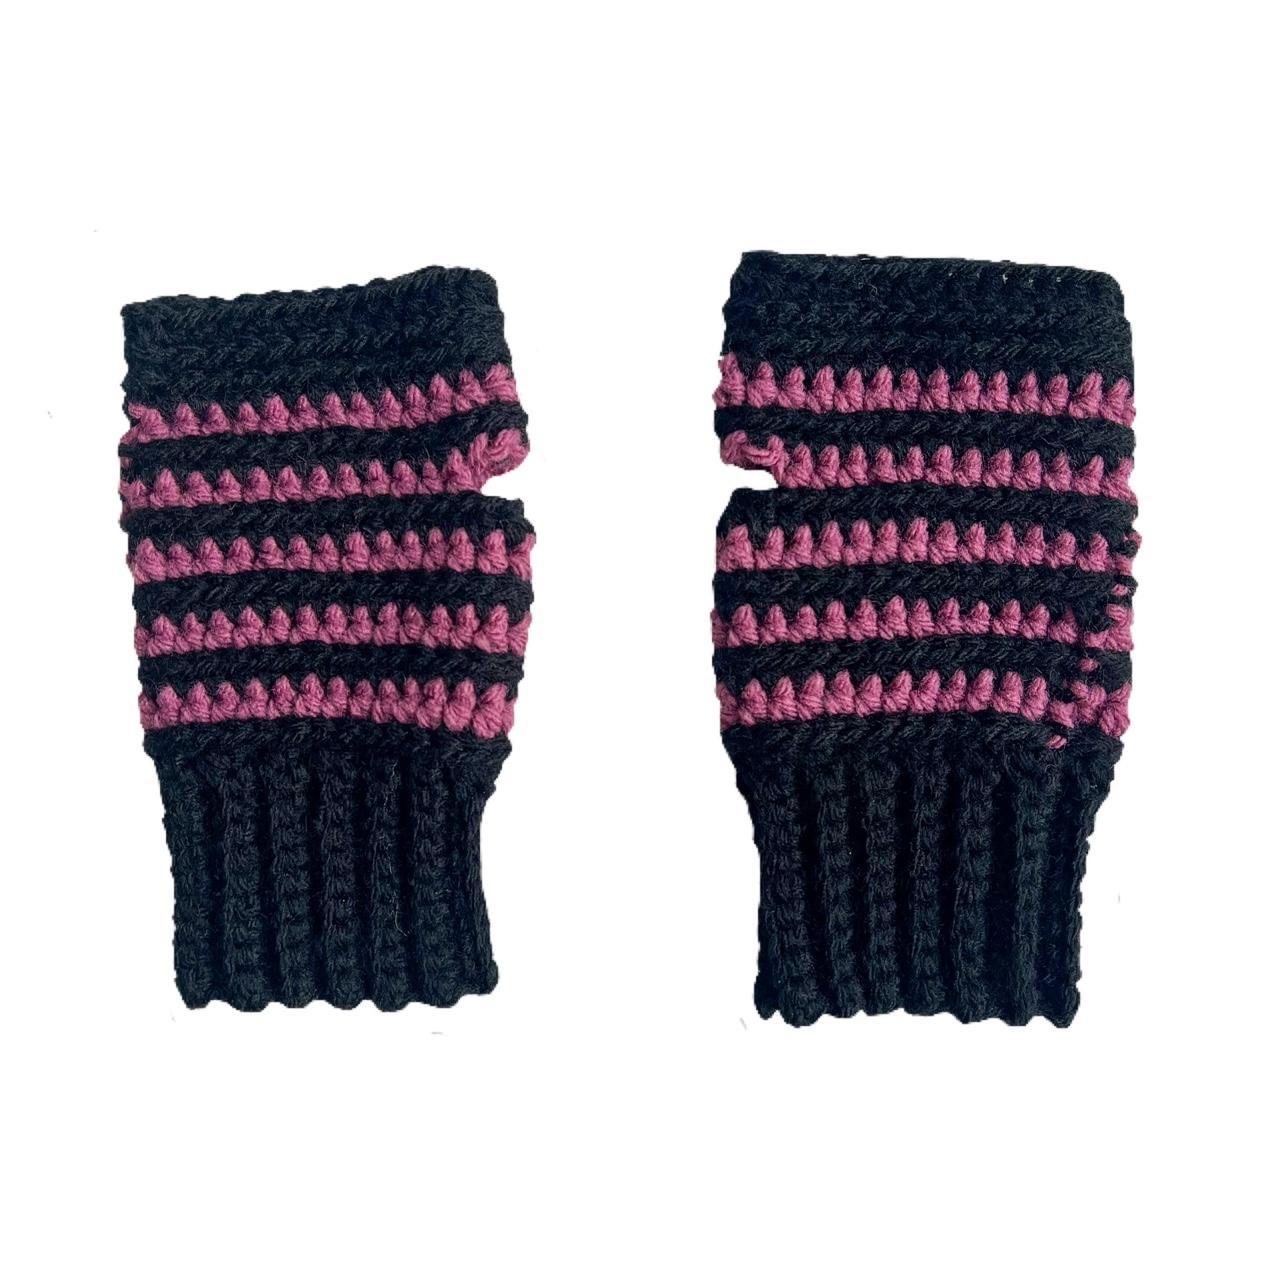 16 Pretty Crochet Arm Warmers and Fingerless Gloves - Whistle and Ivy